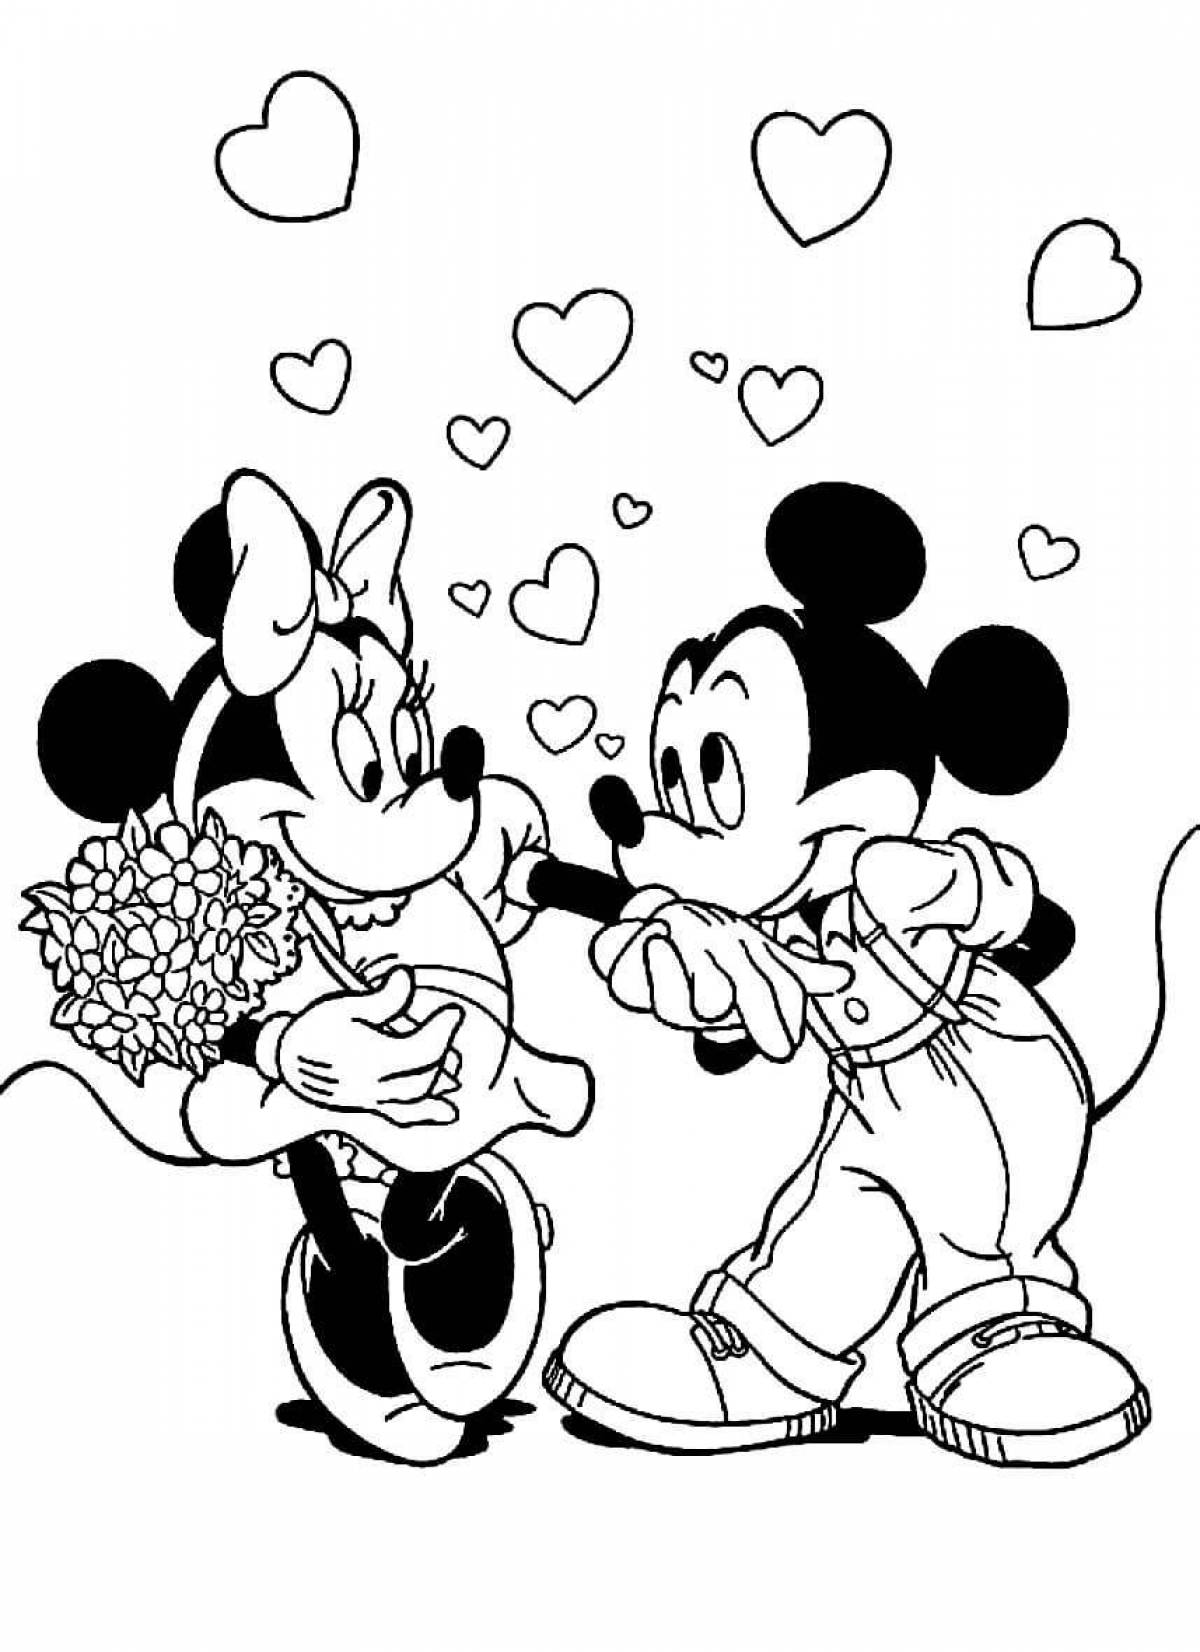 Fancy mickey mouse coloring book